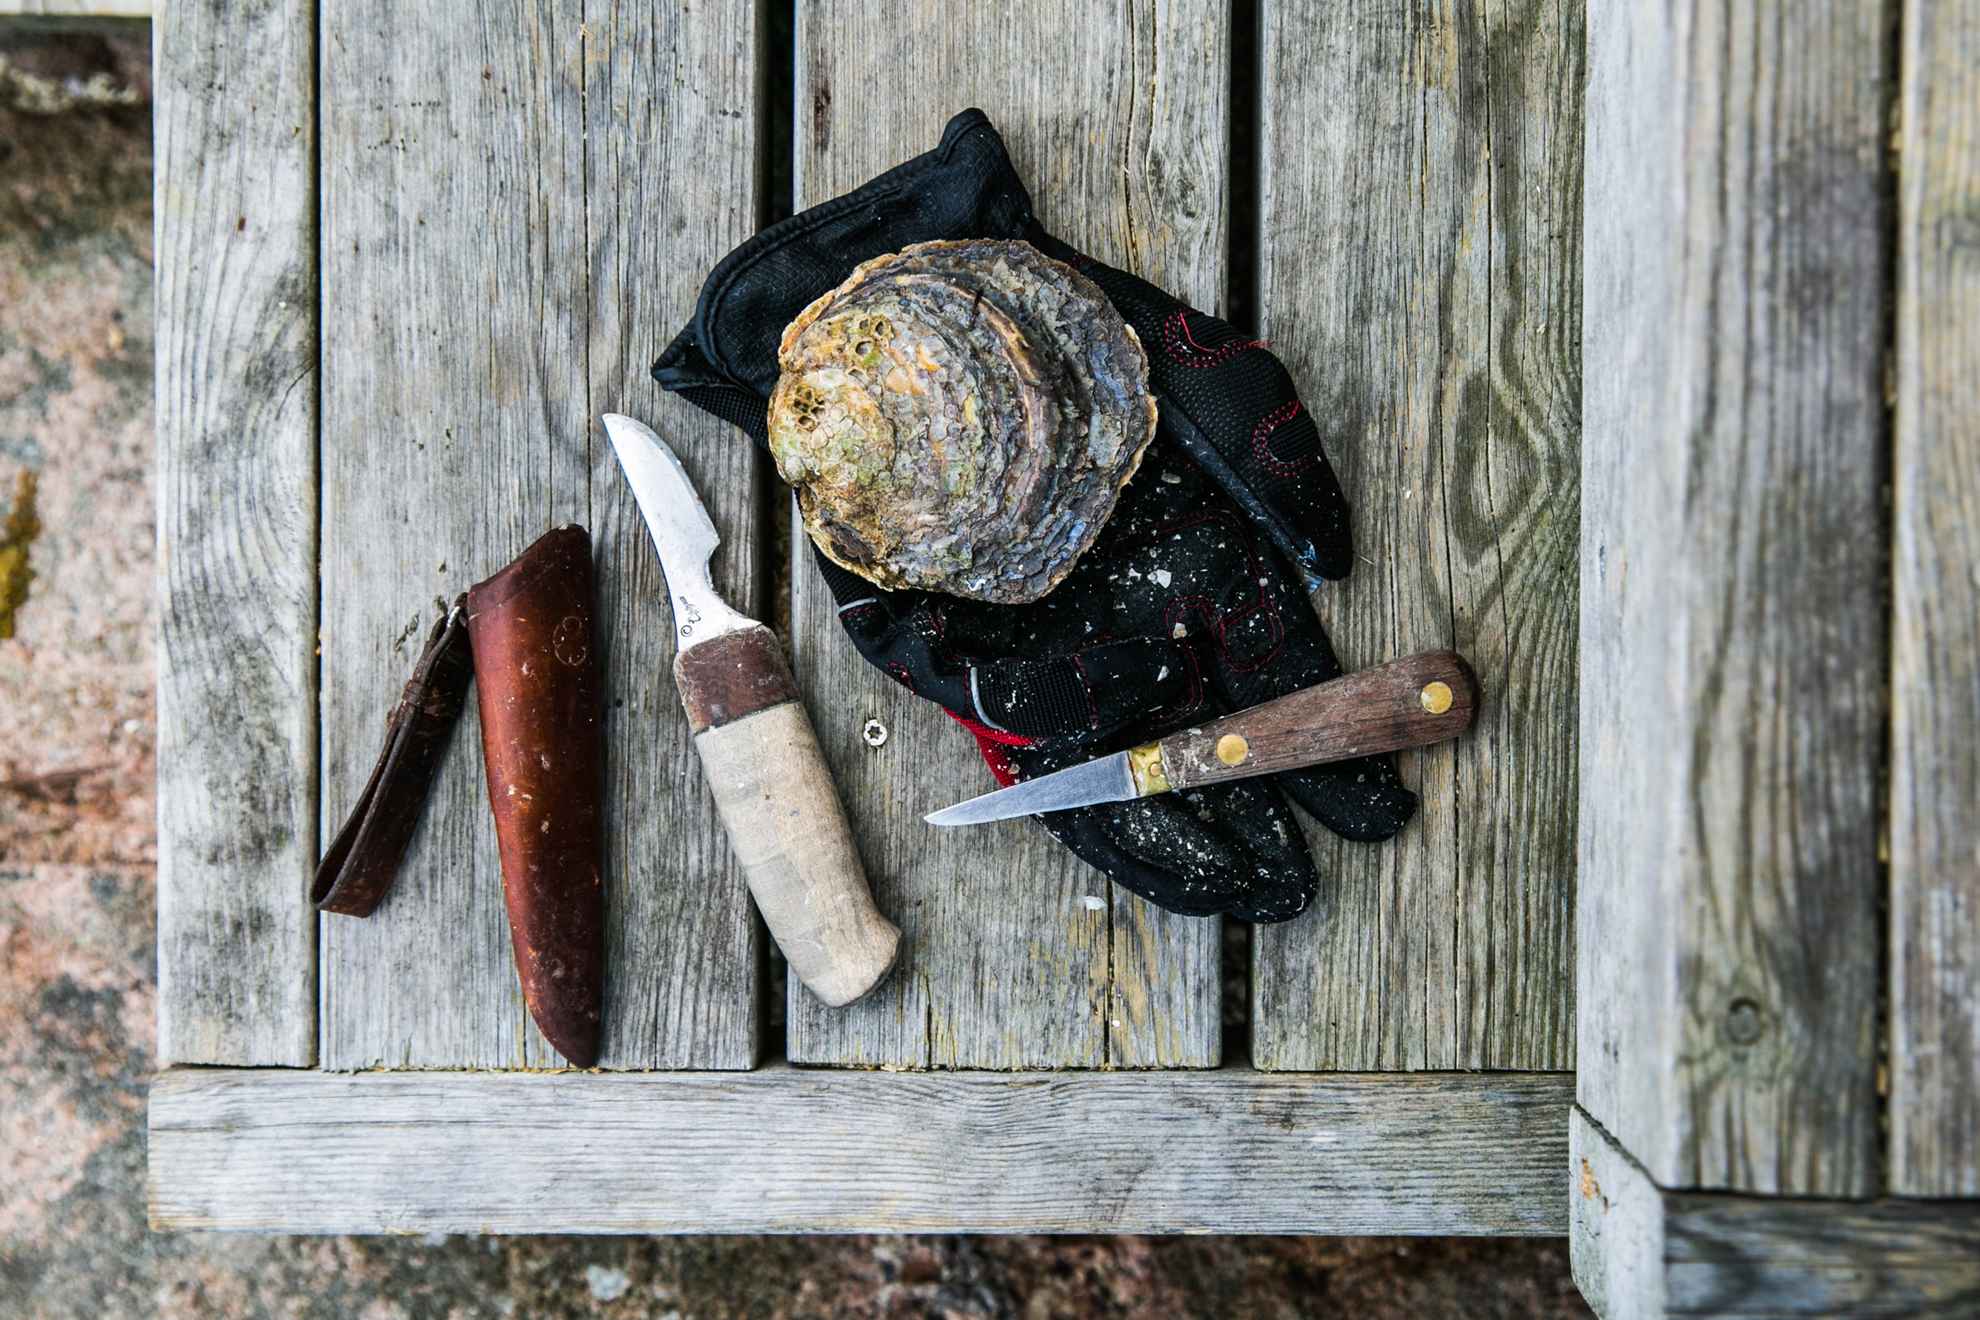 On a wooden table lies an oyster along with a glove two knives.